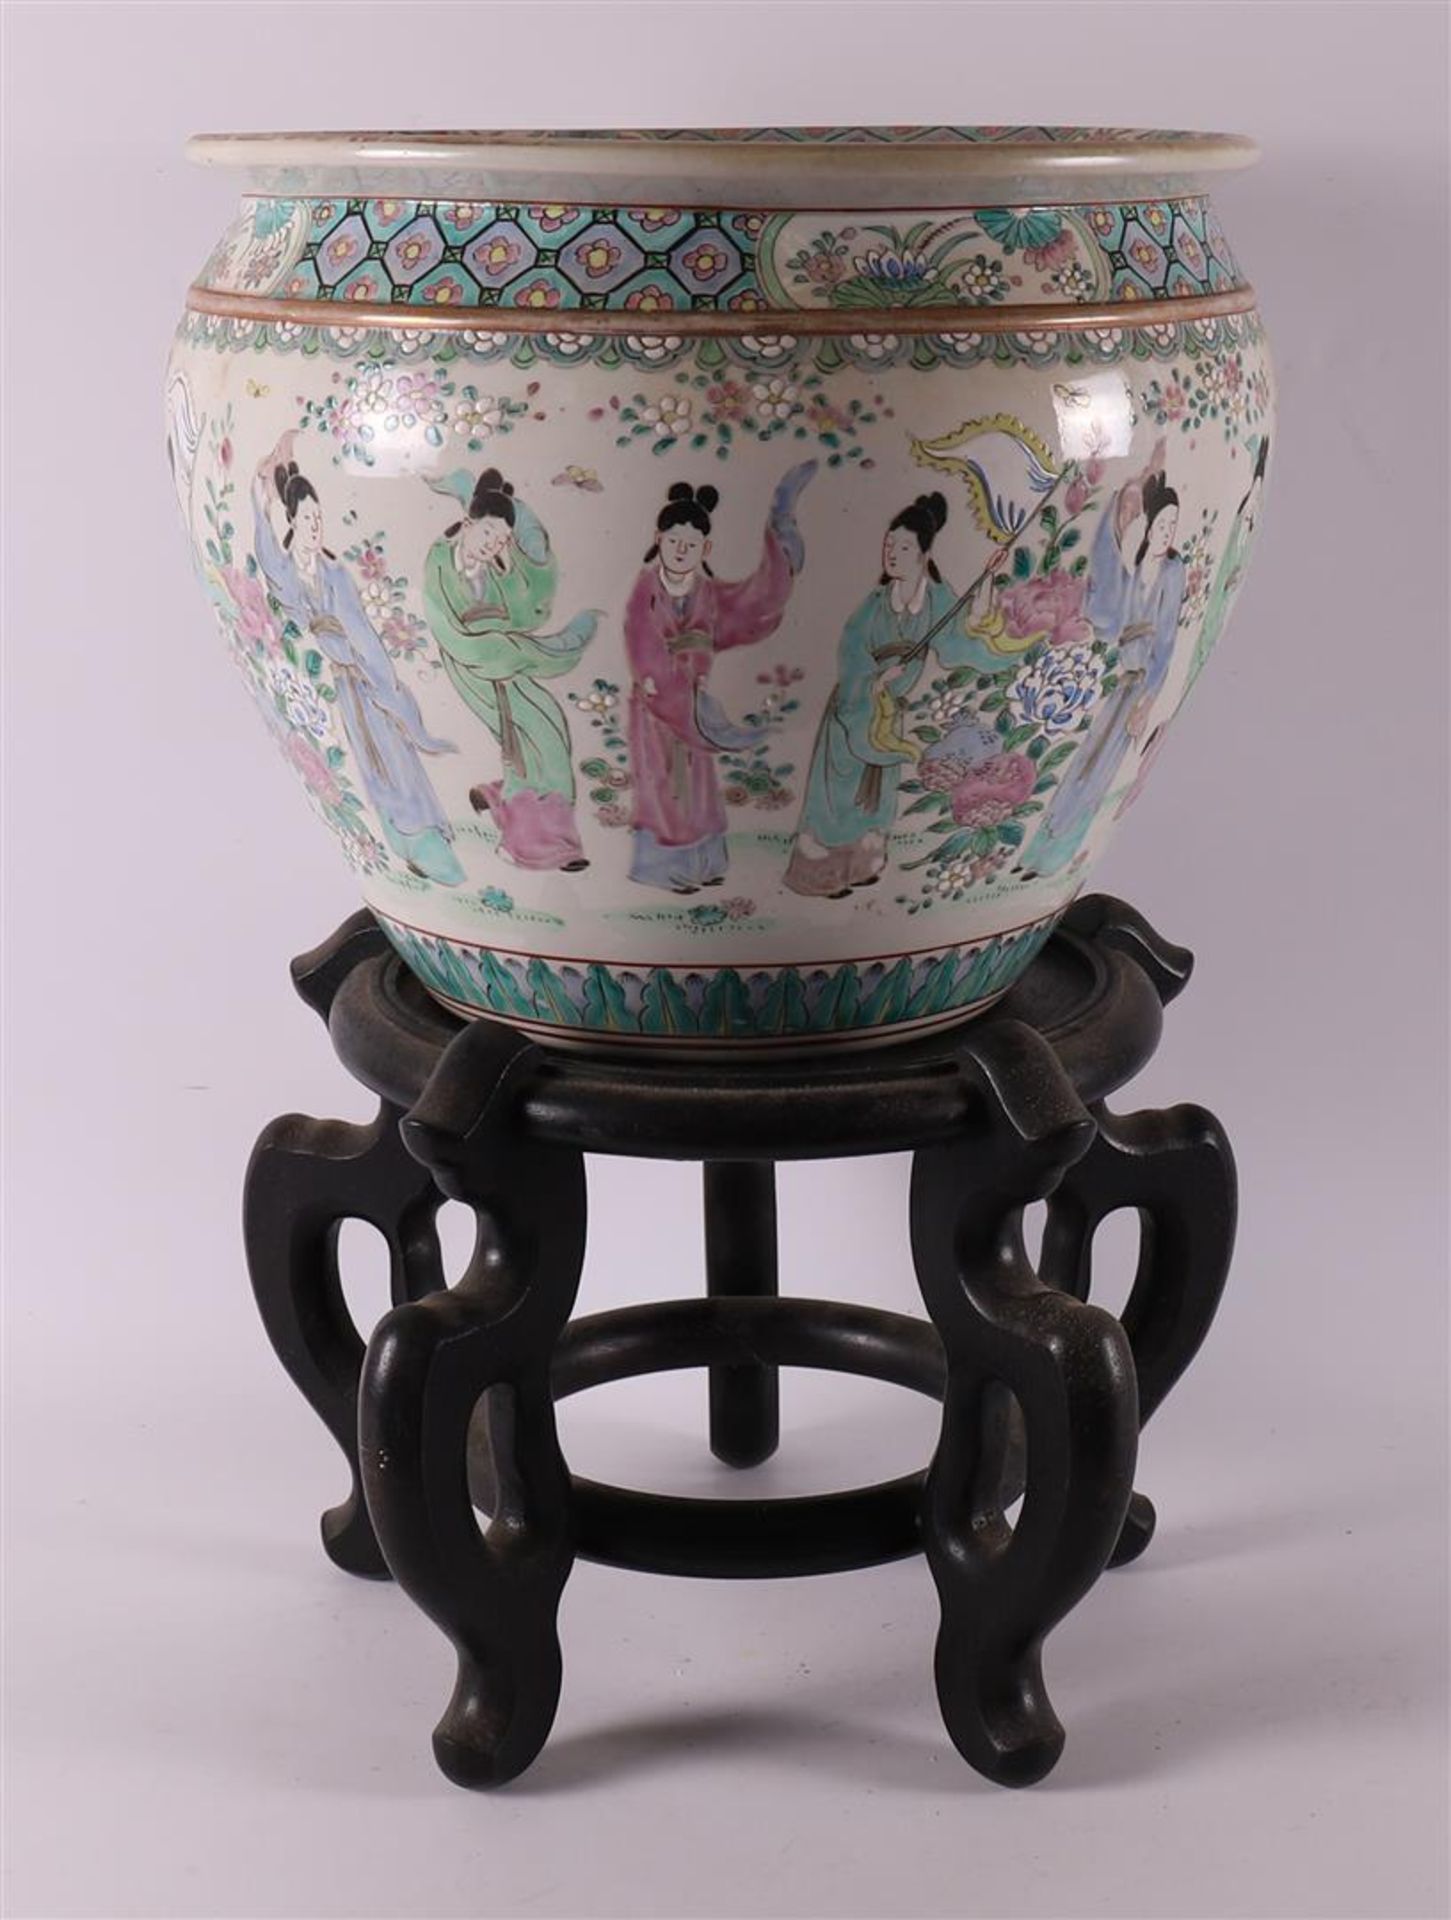 A porcelain cachepot or fishbowl on a loose wooden base, China, 20th century. - Image 2 of 7